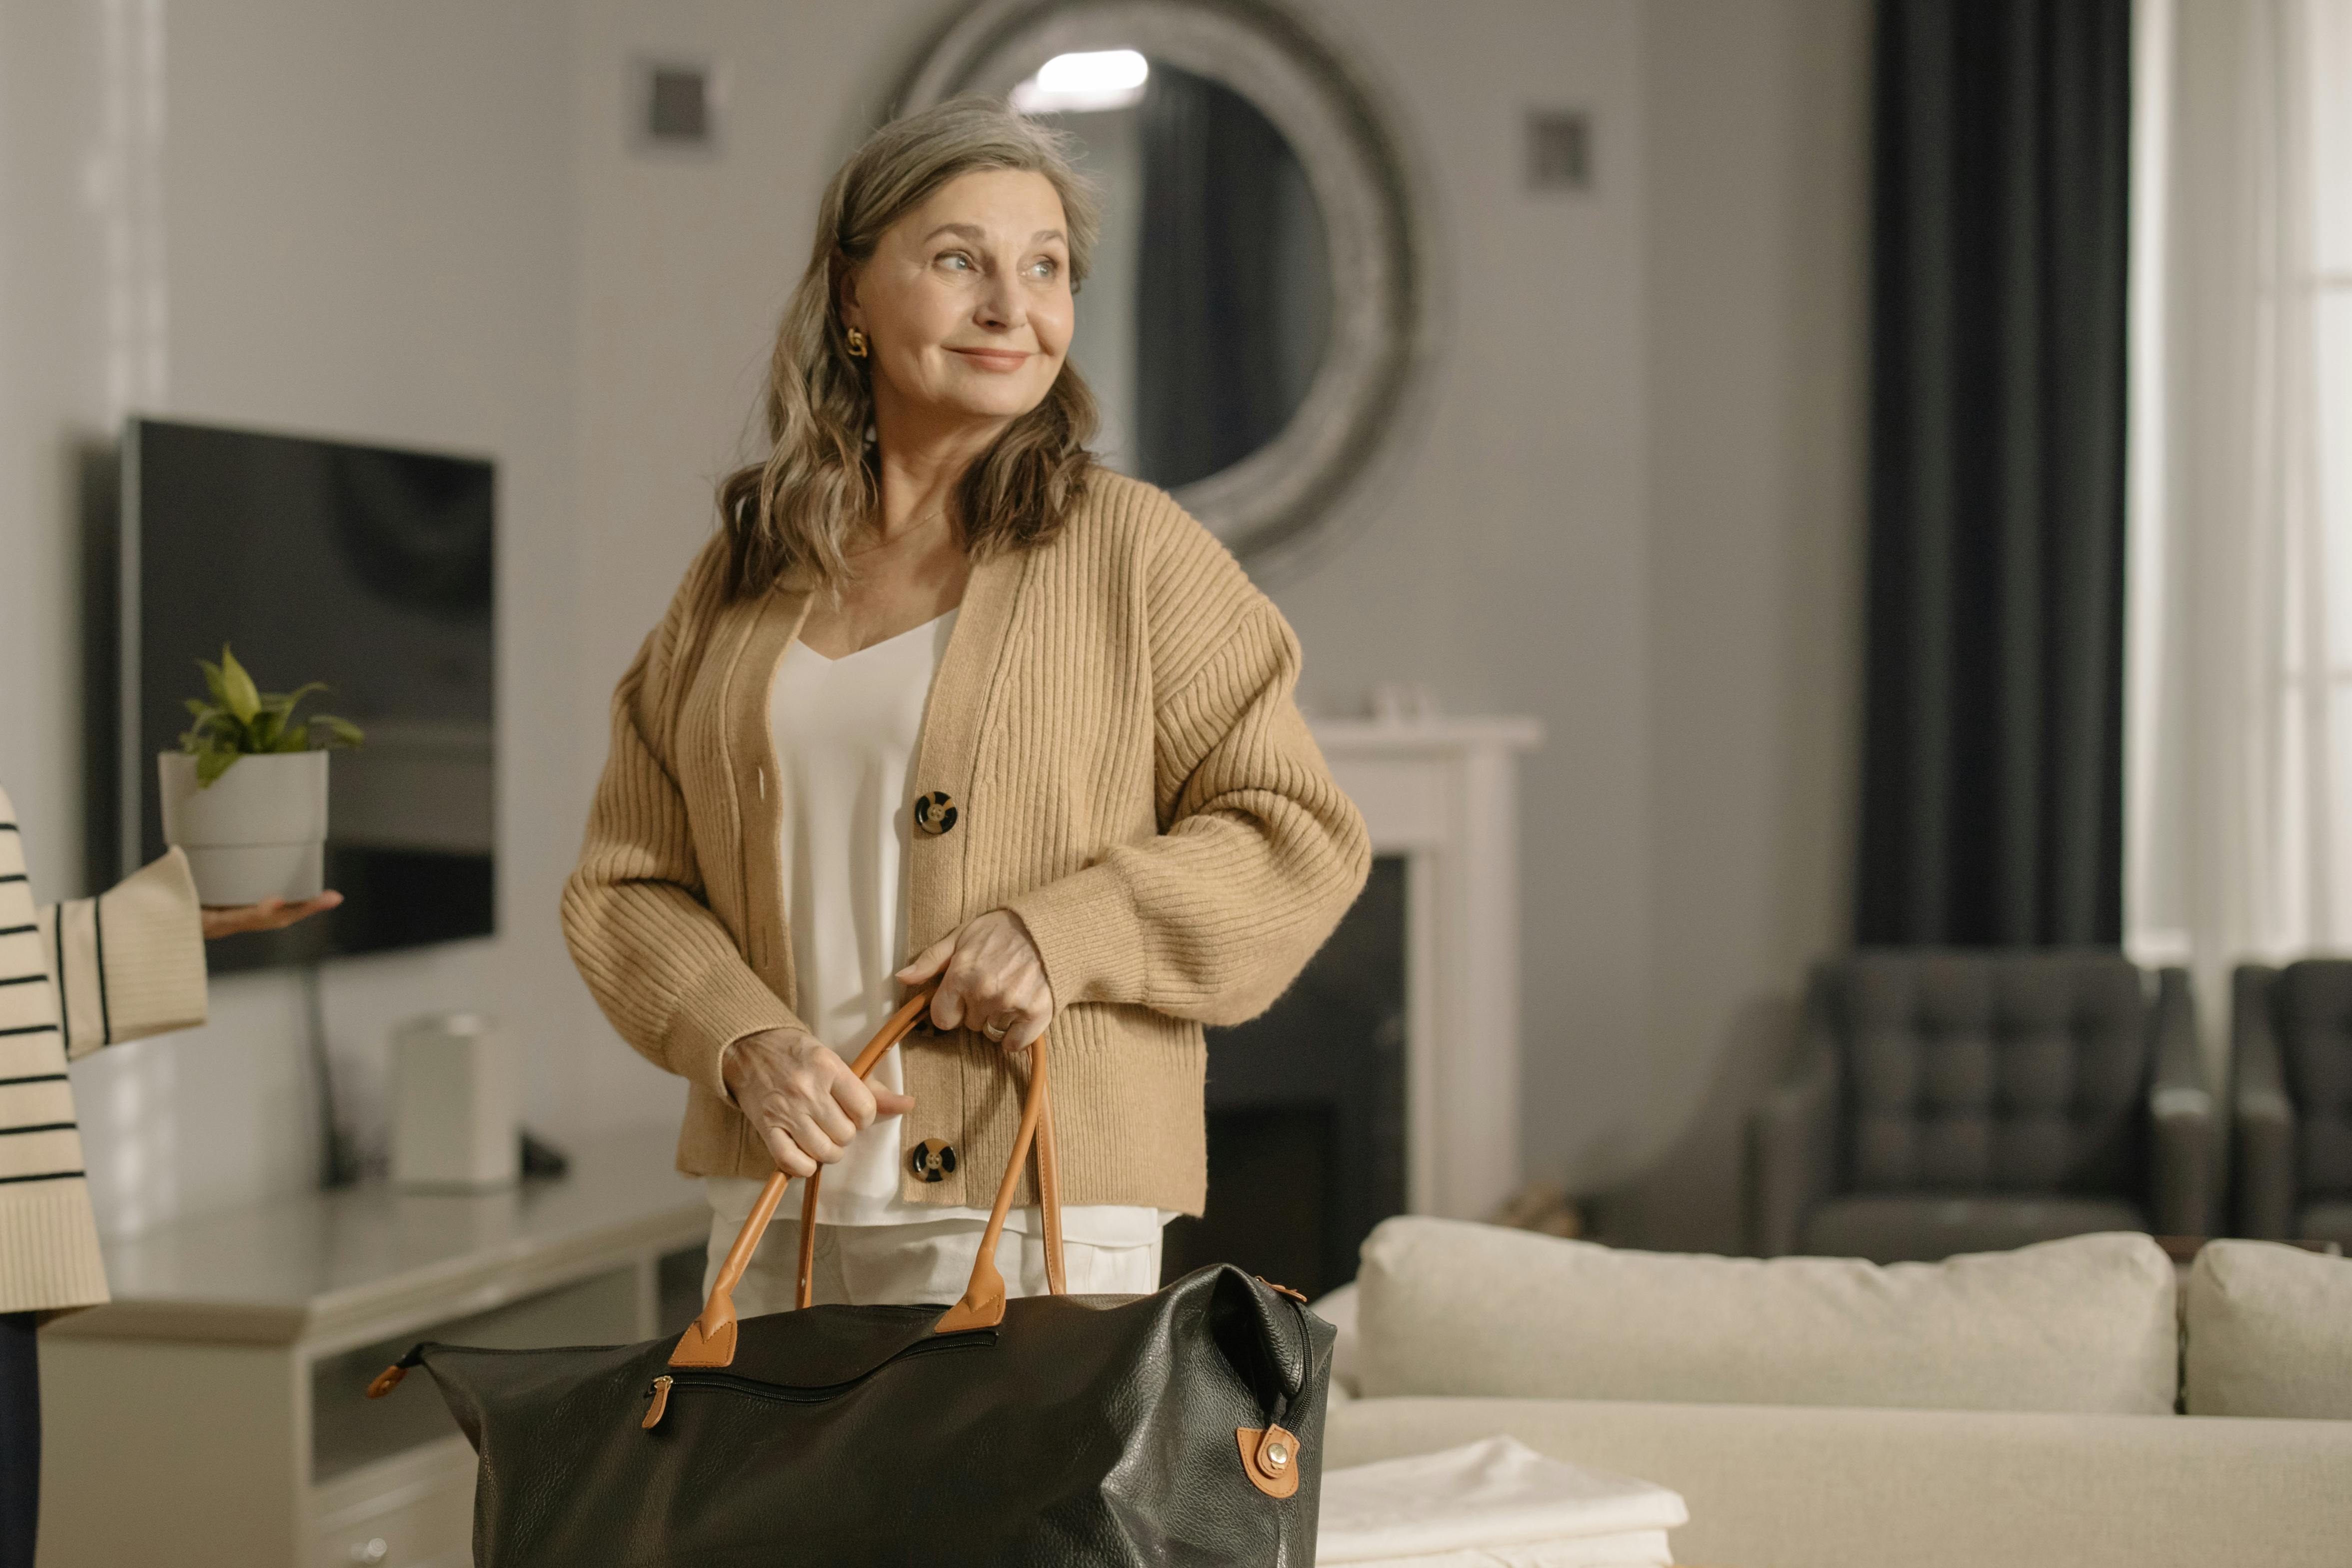 A woman holding a bag before leaving a house | Source: Pexels